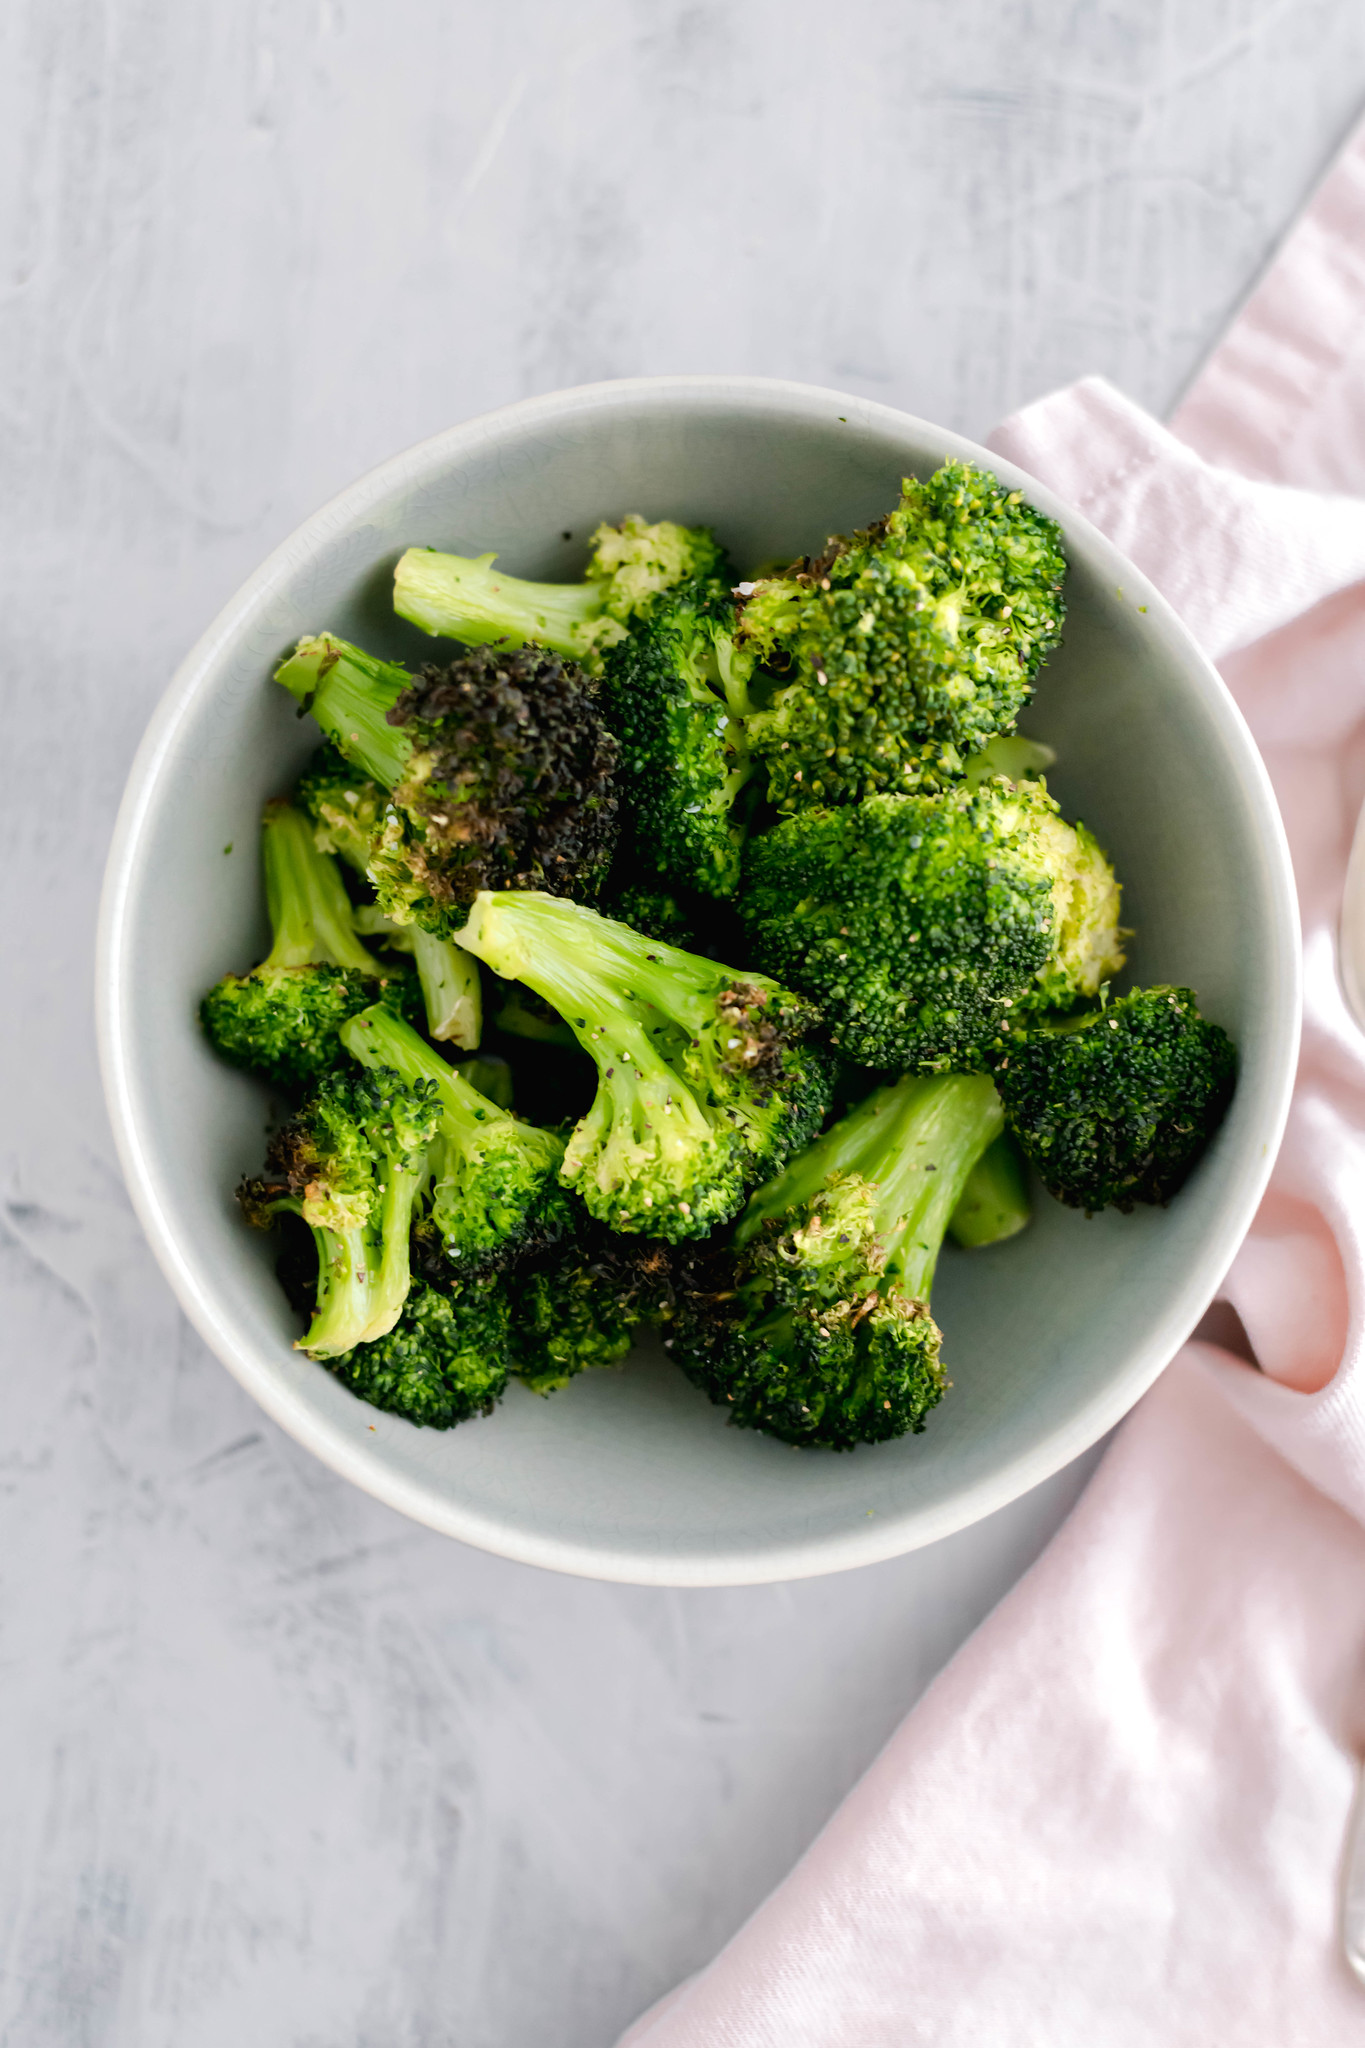 Make crisp, perfectly cooked frozen broccoli in the air fryer in minutes. The perfect easy weeknight side dish. Looking for an easy weeknight side dish? This Air Fryer Broccoli is just what you need. It starts with frozen broccoli and the cooking method results in crisp, perfectly cooked broccoli.